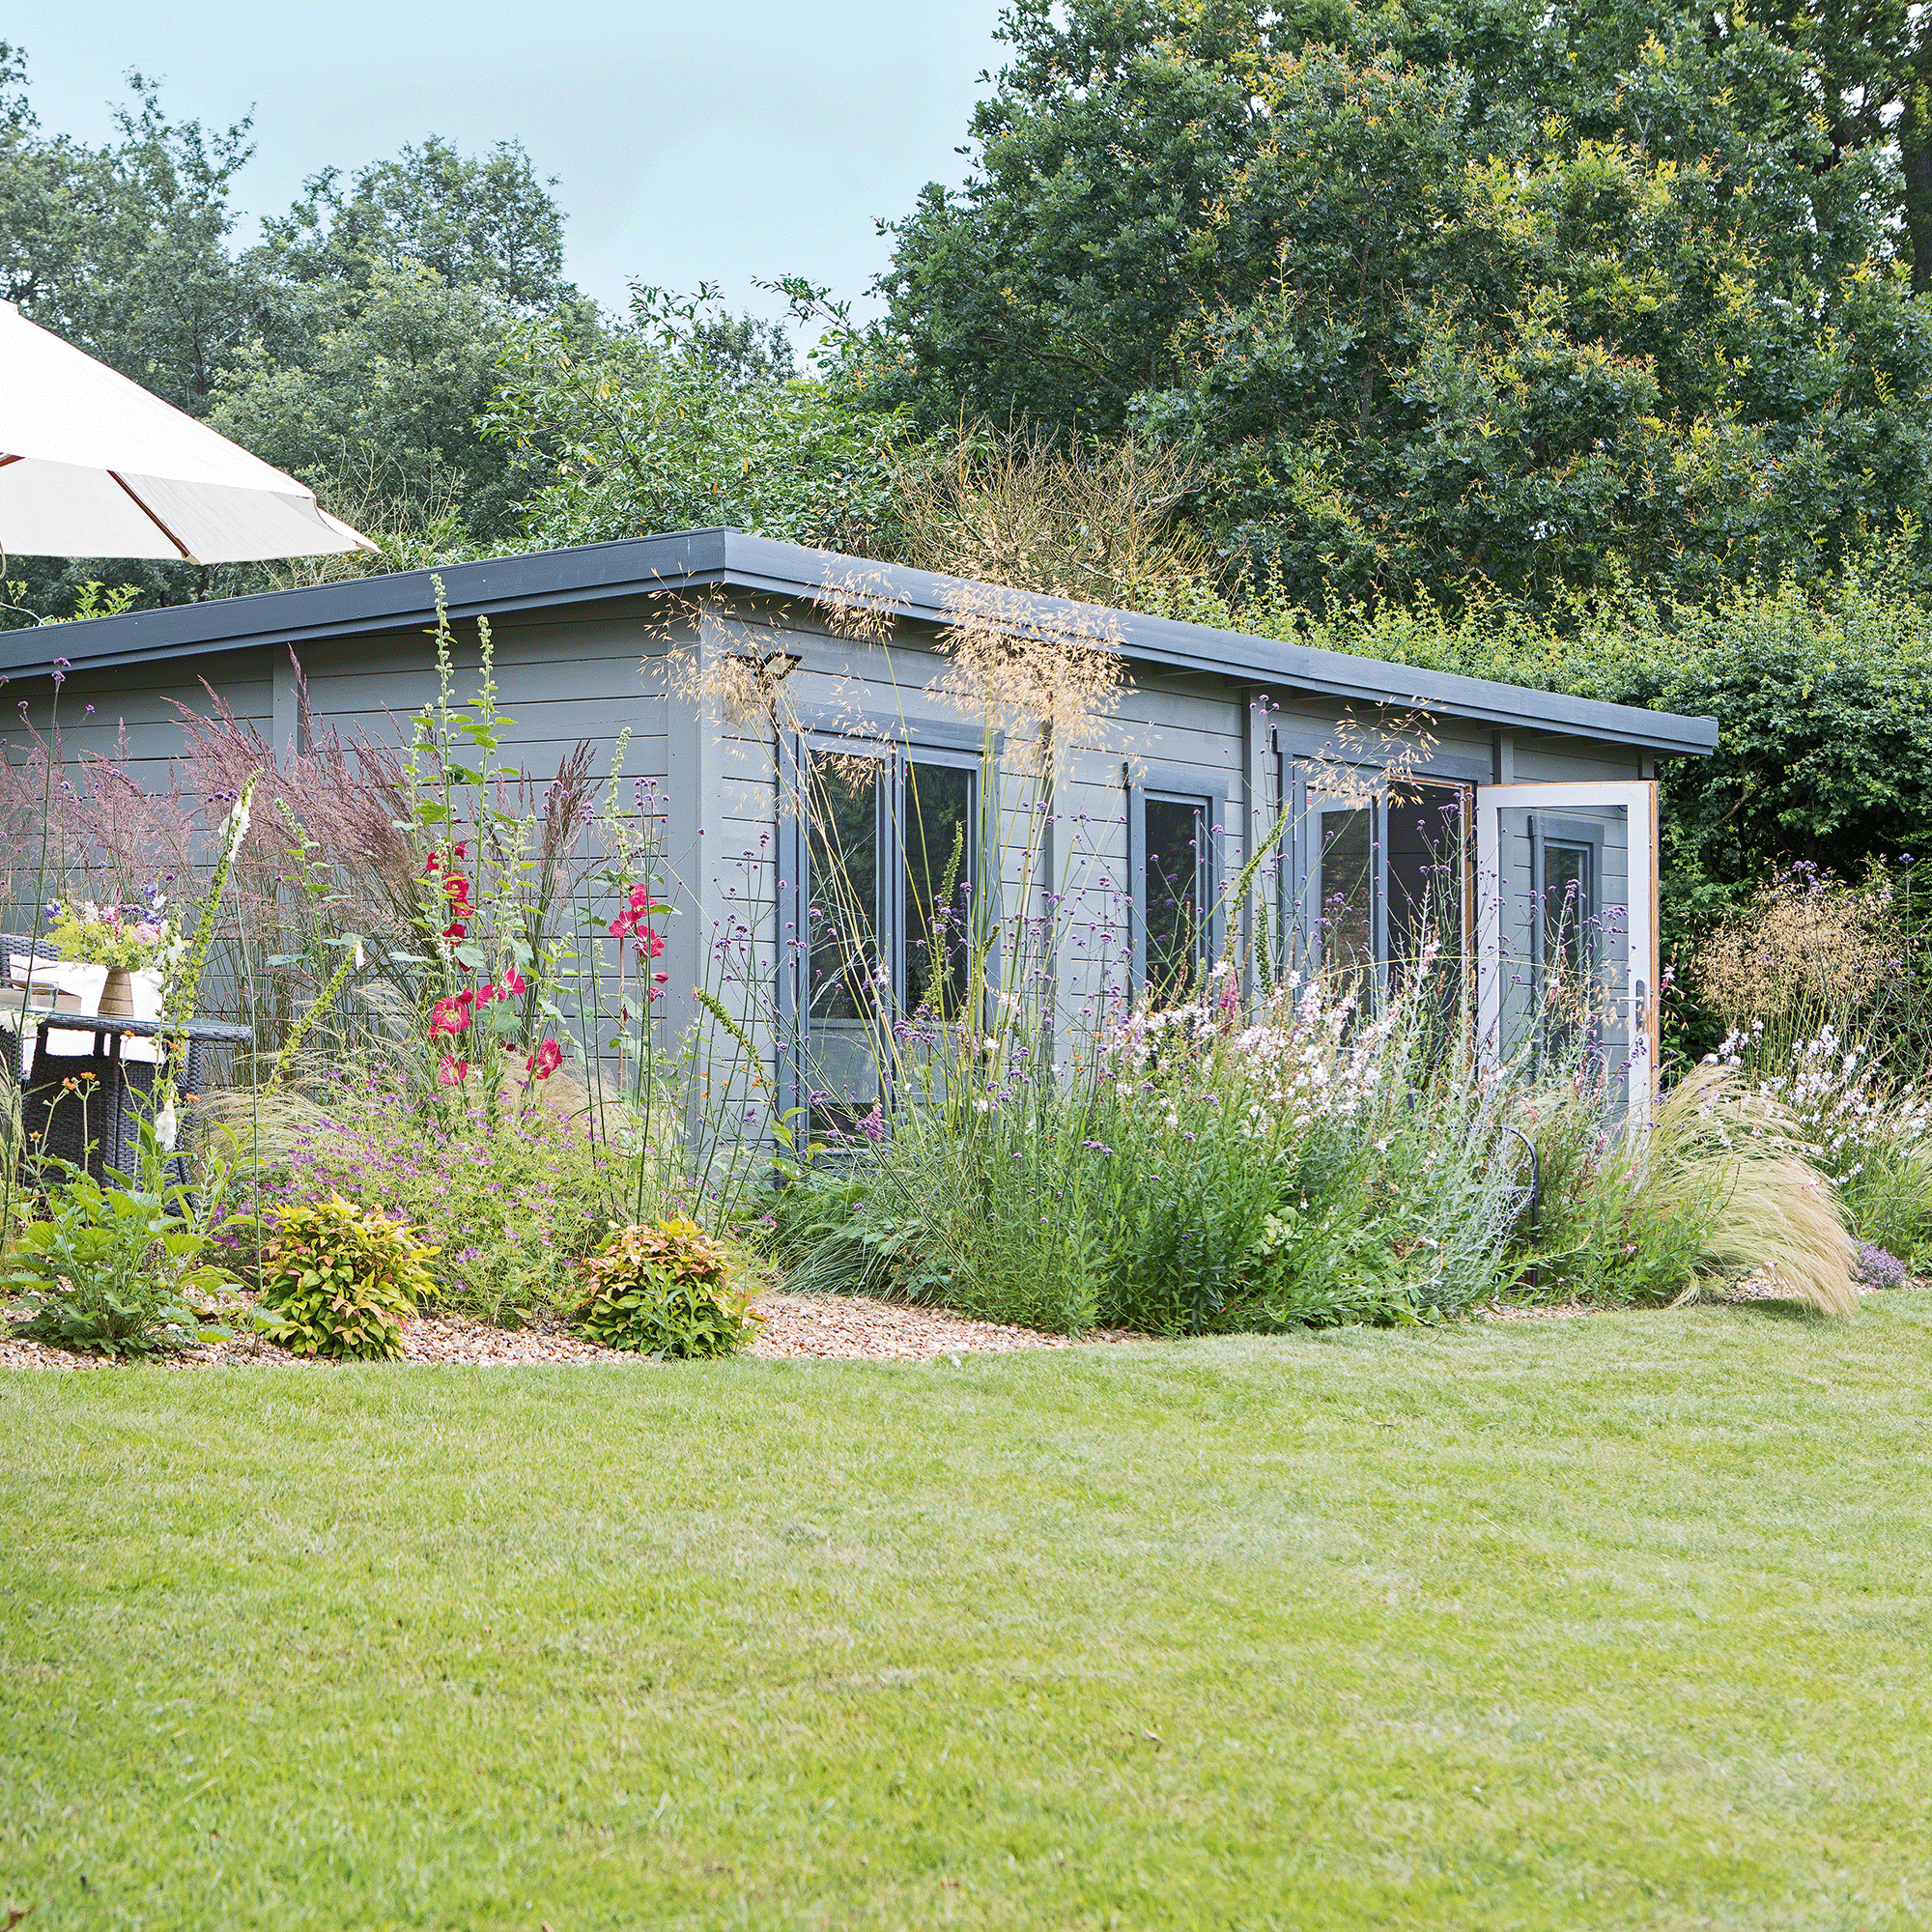 Blue shed with neat lawn and tall plants